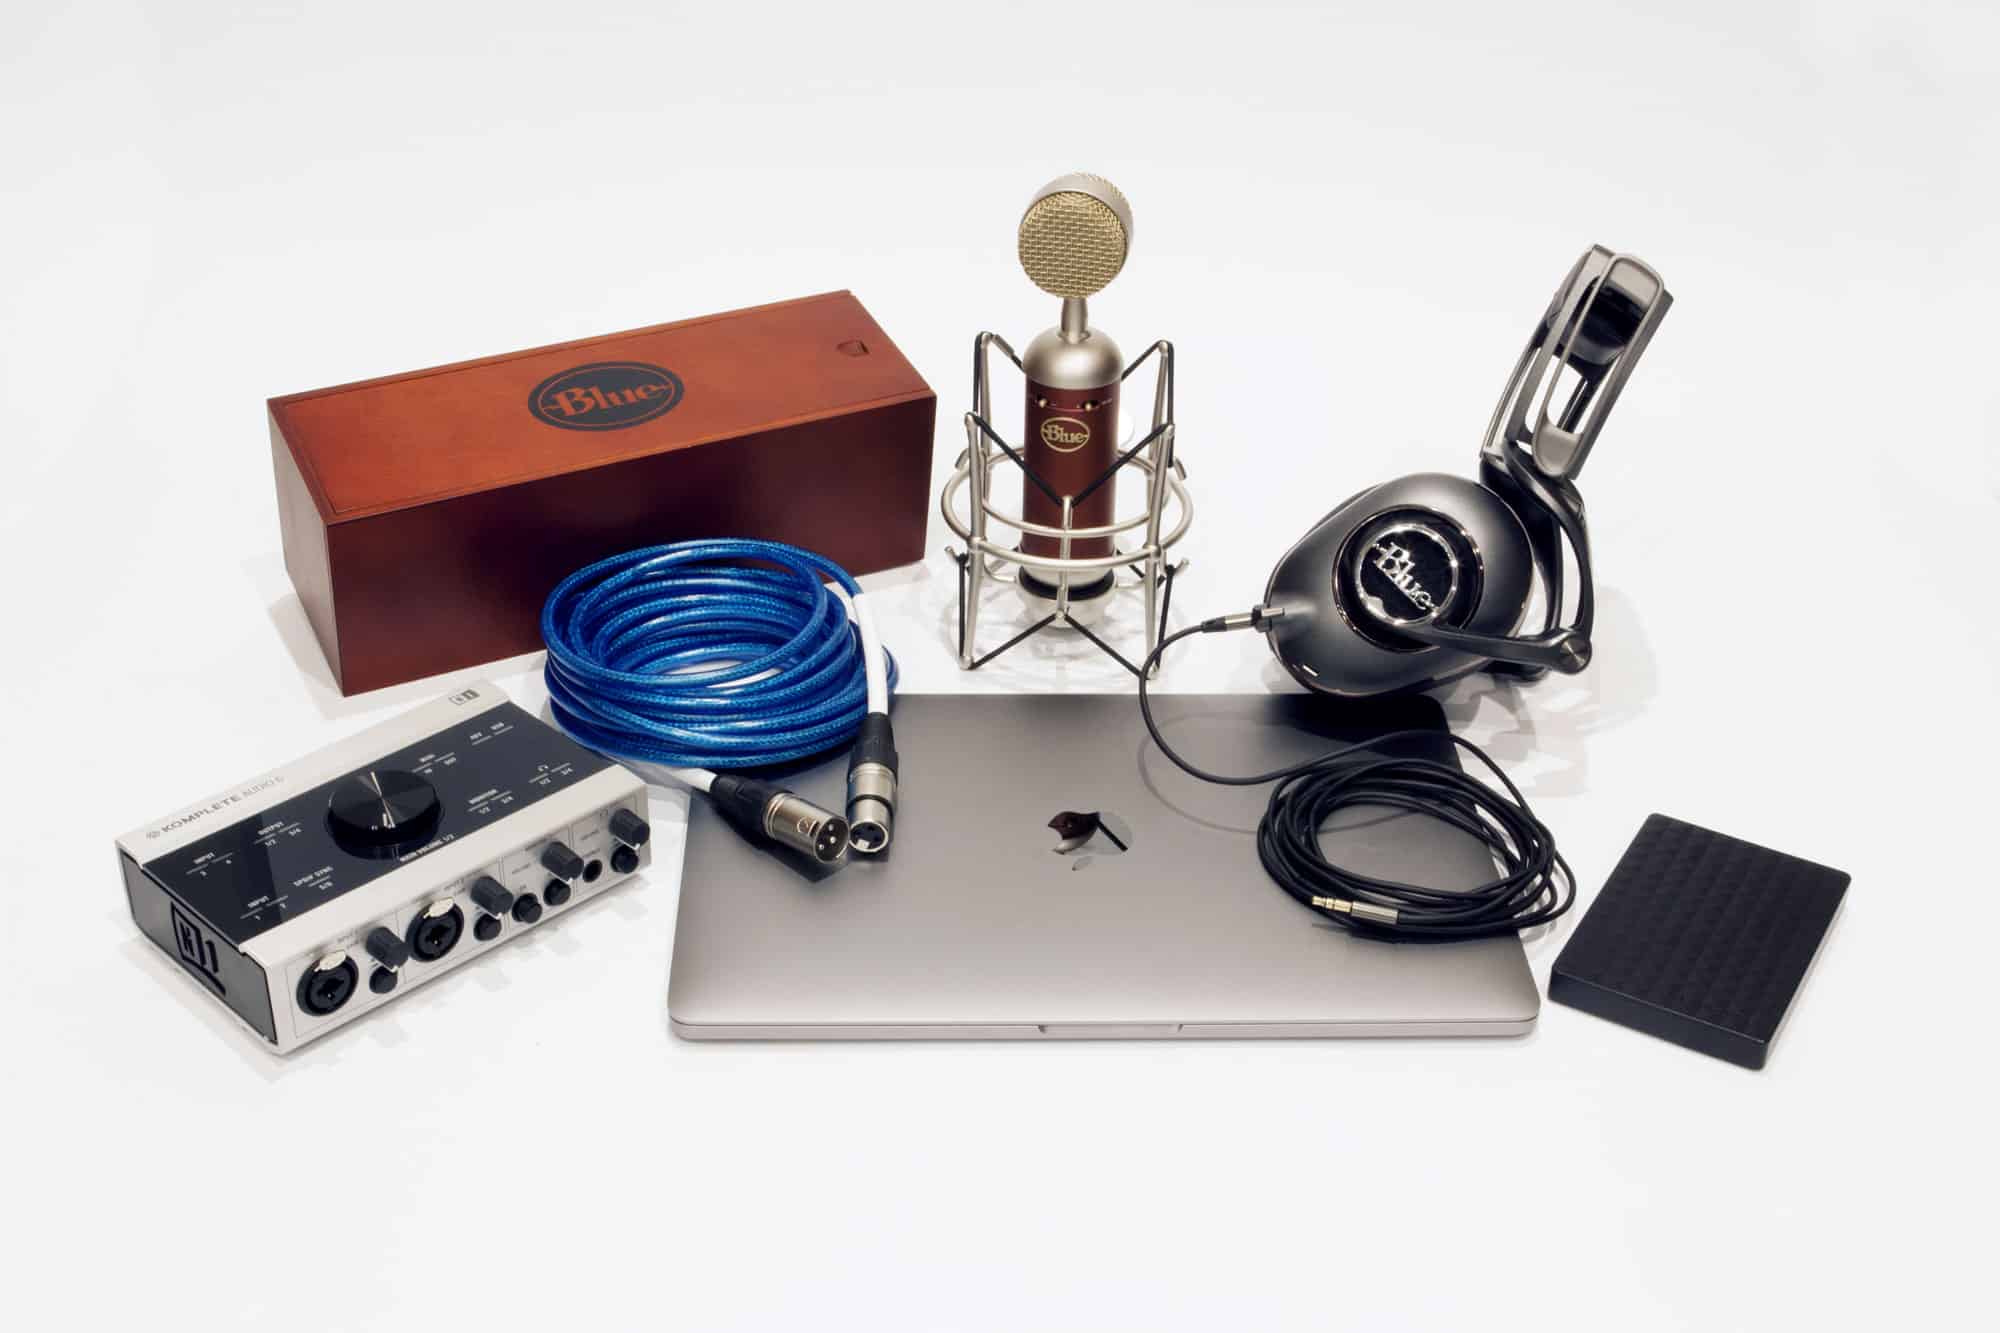 Mobile Recording Studio: How to Build Yours